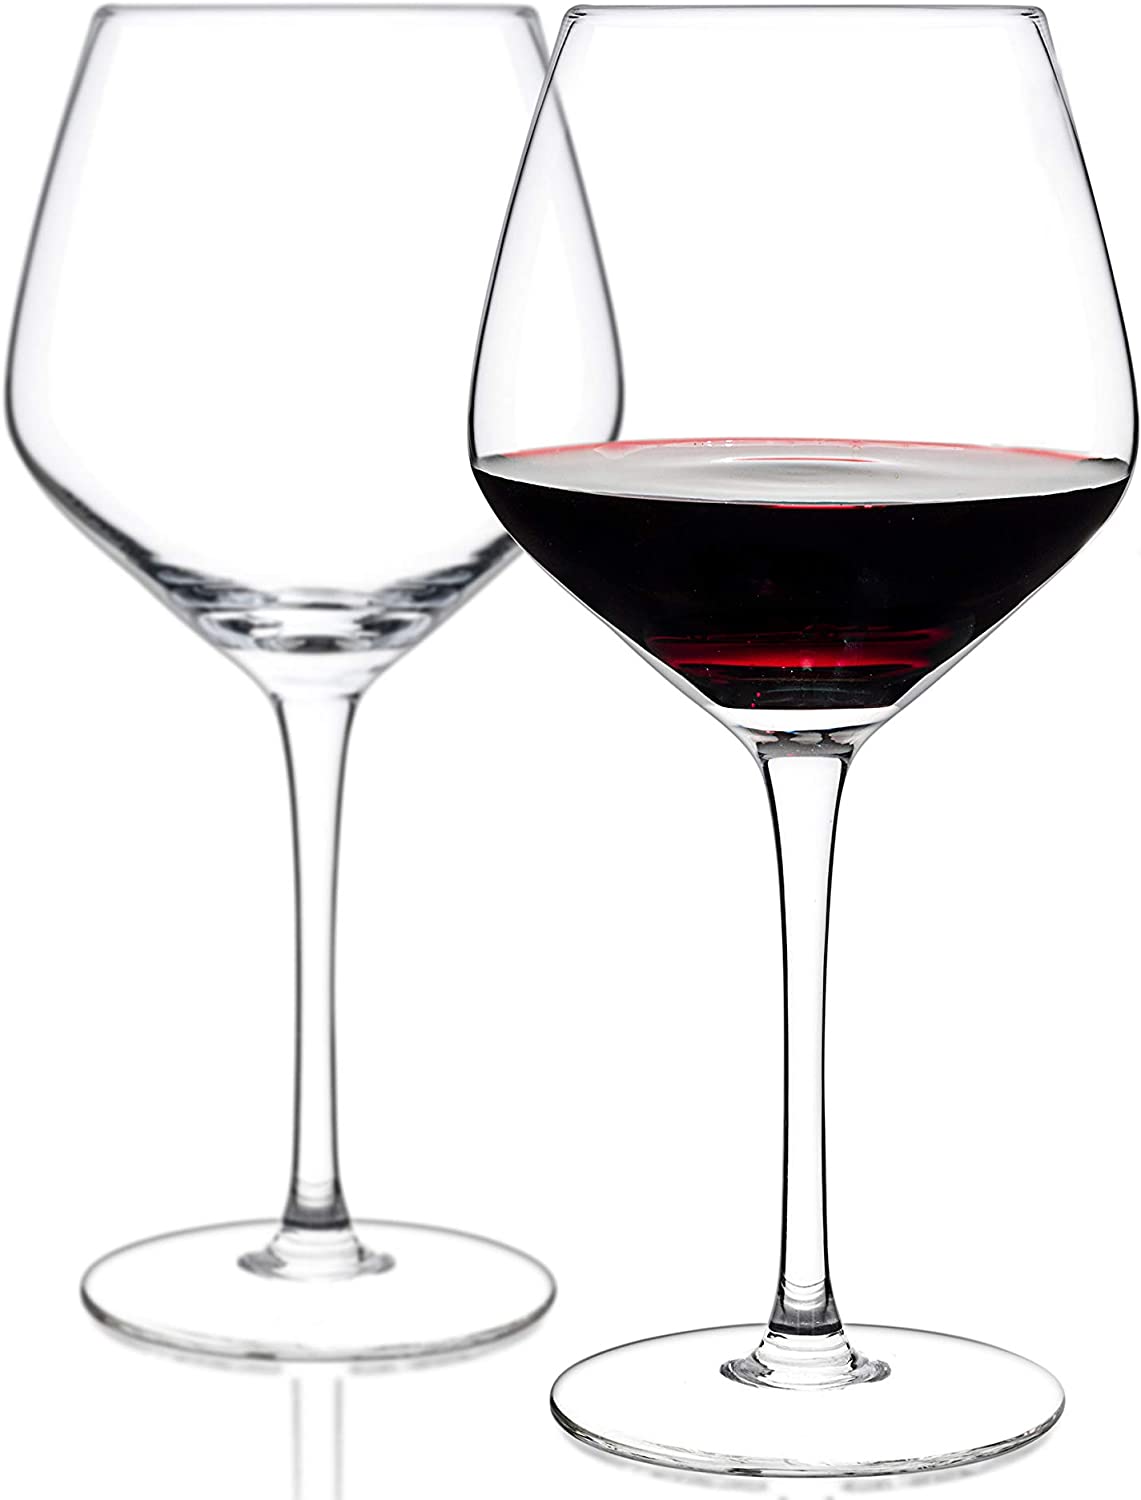 Crystal vs. Glass When it Comes to Wine Glasses